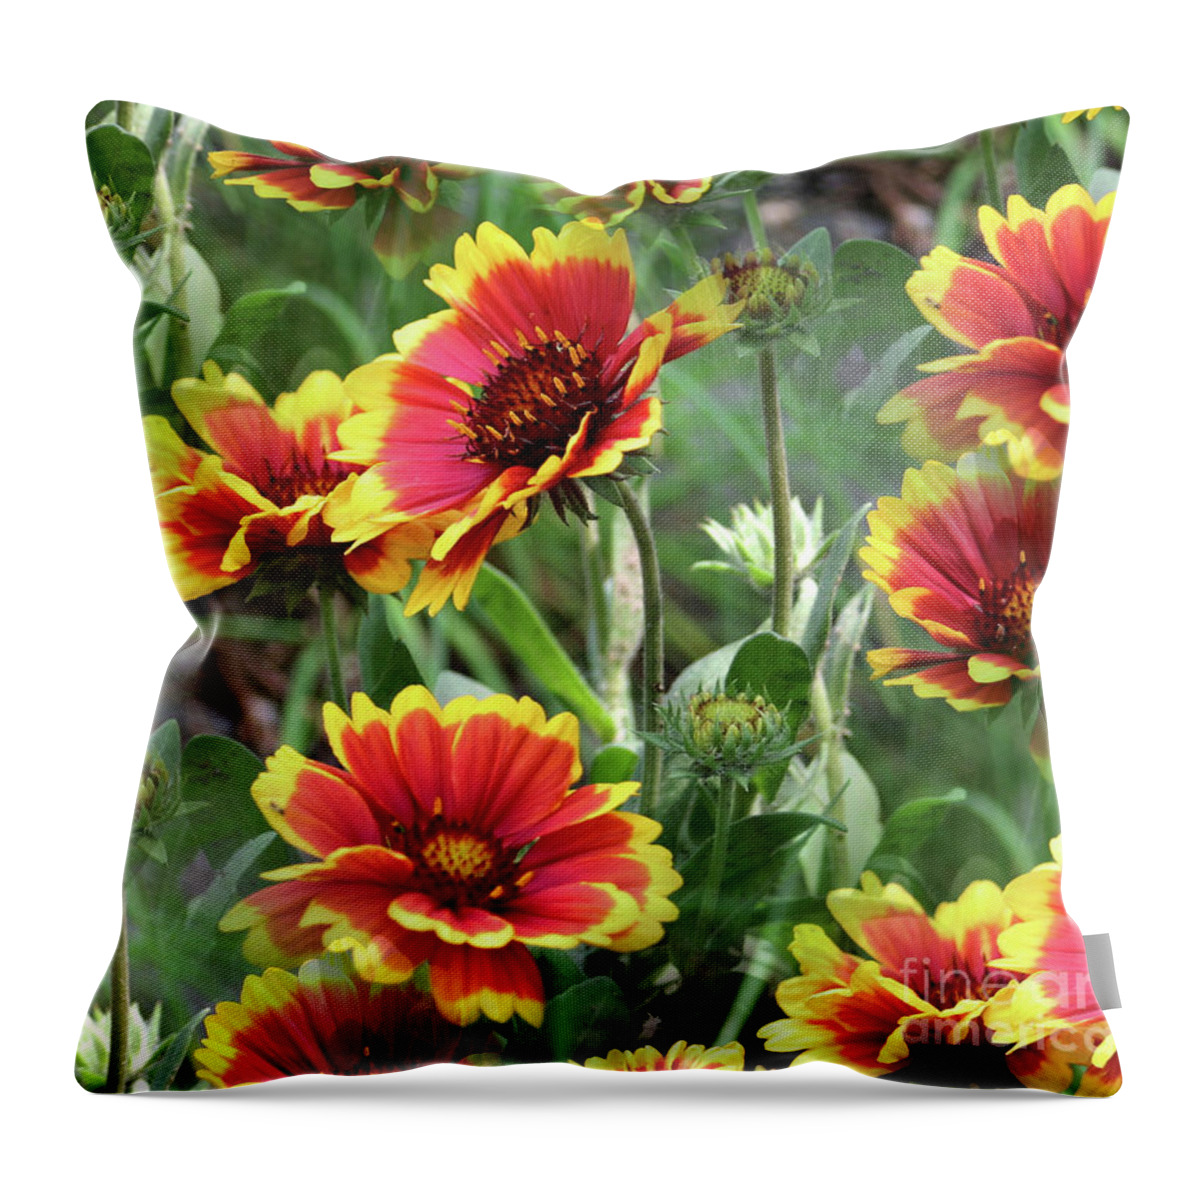 Daisy Throw Pillow featuring the photograph Red And Yellow Daisy Dreams by Smilin Eyes Treasures